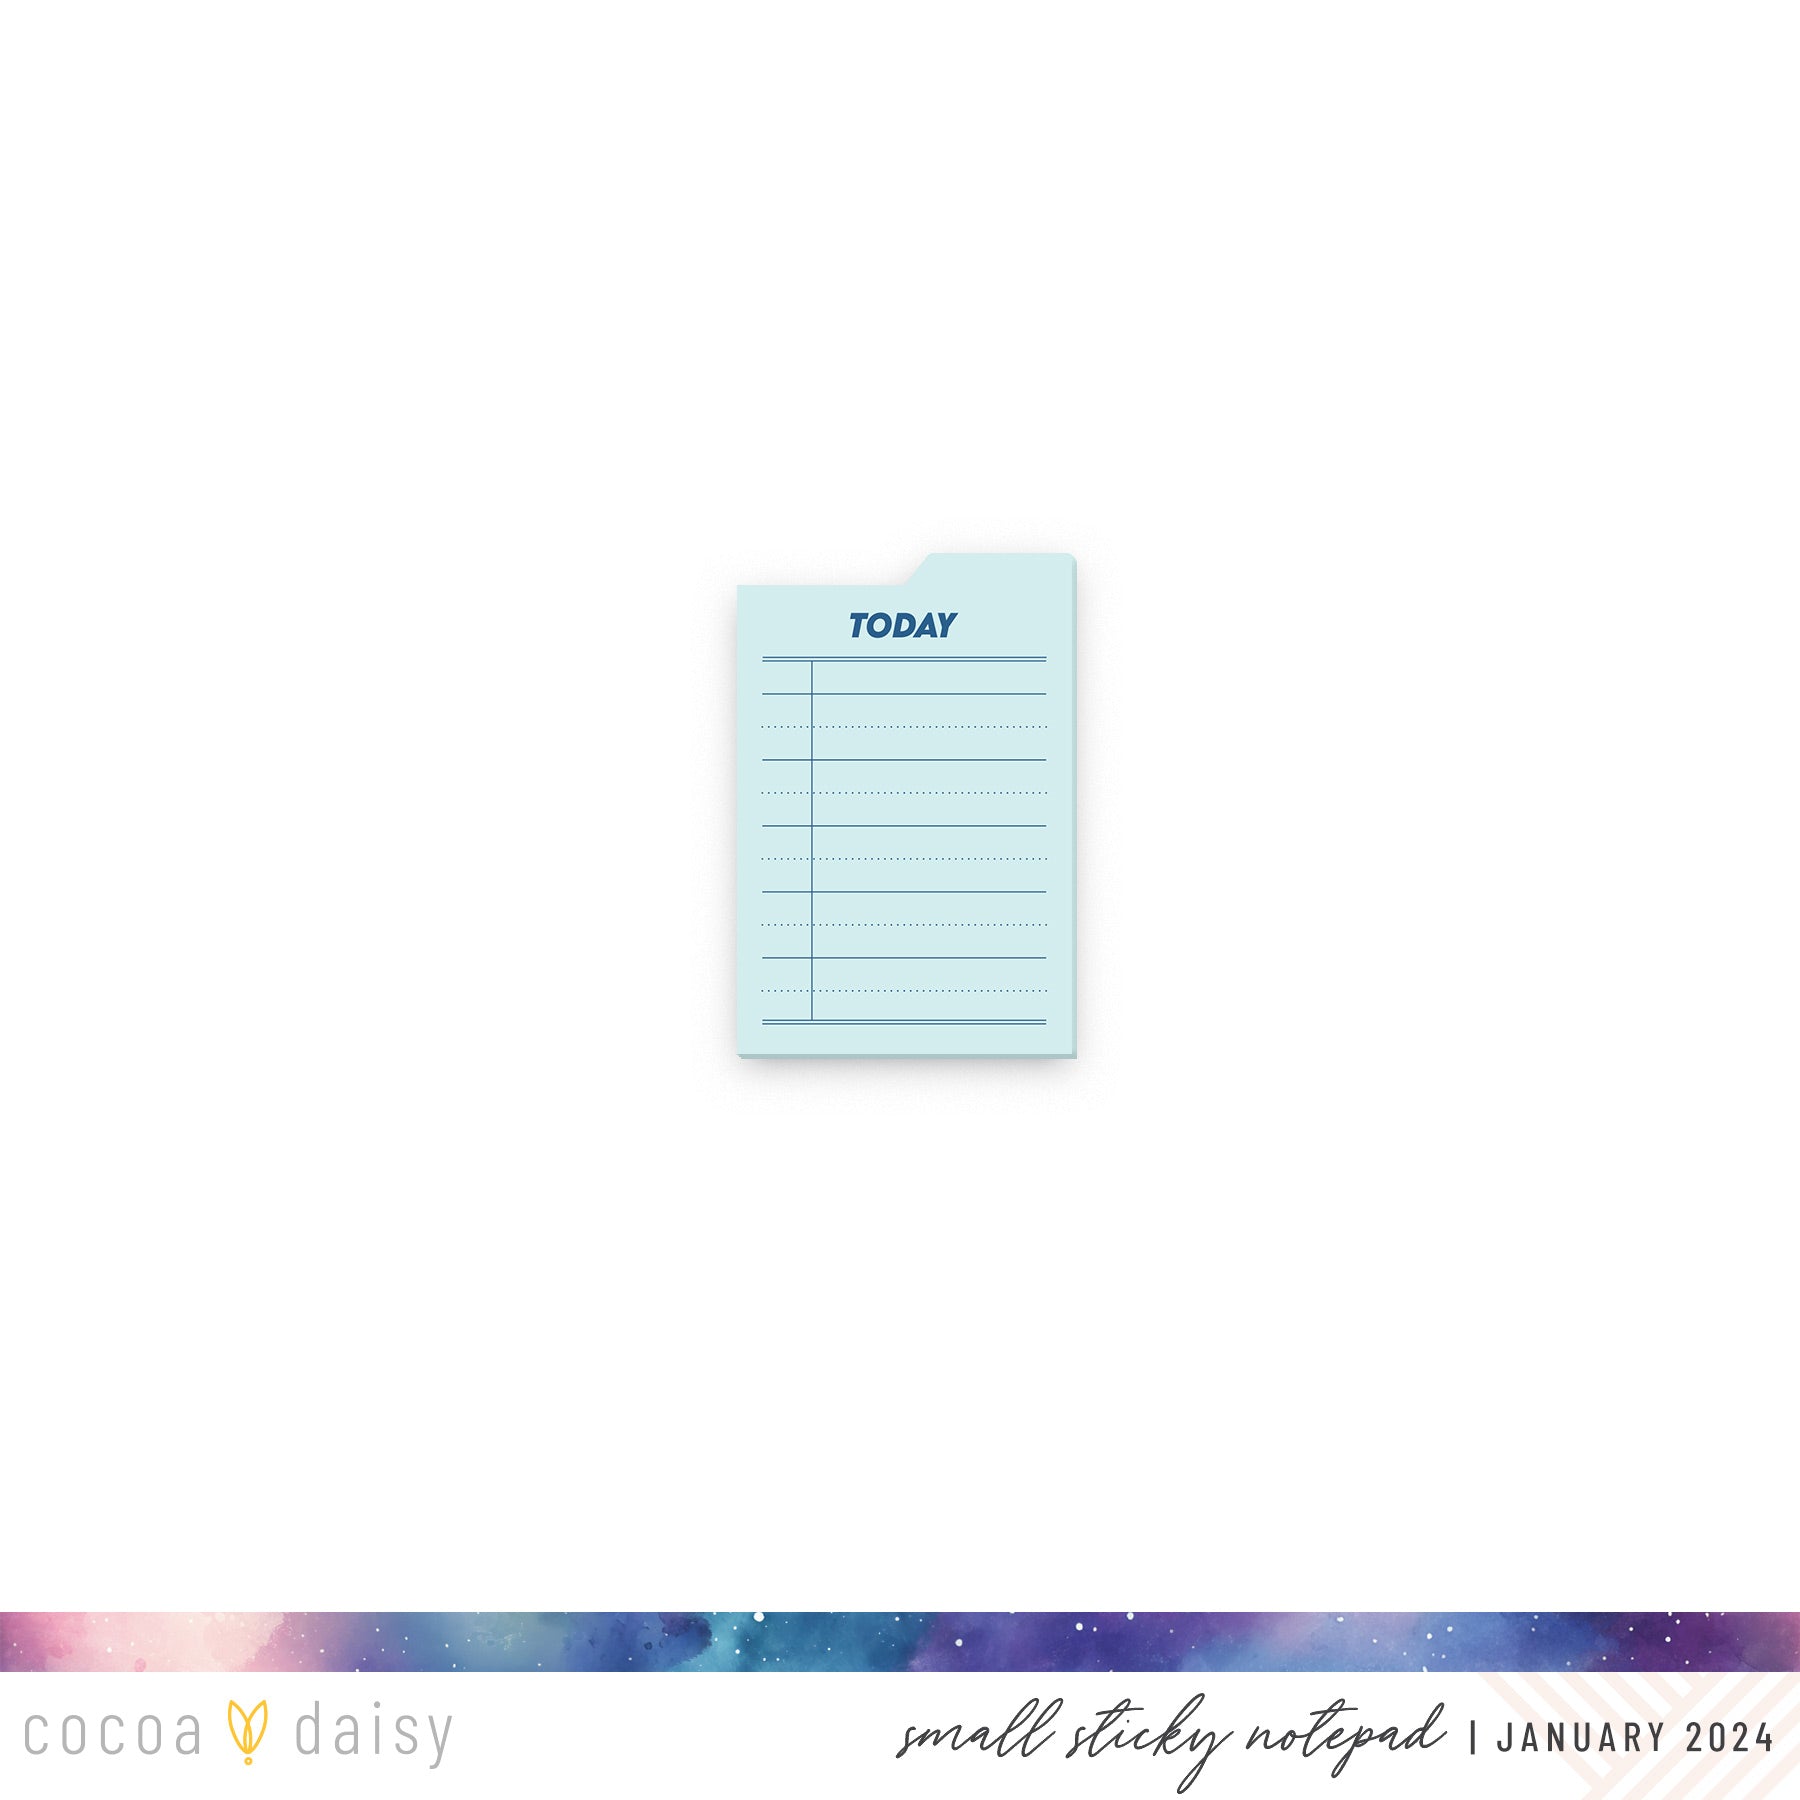 Silent Moon "Today" Small Sticky Notes from the Stationery Kit - January 2024